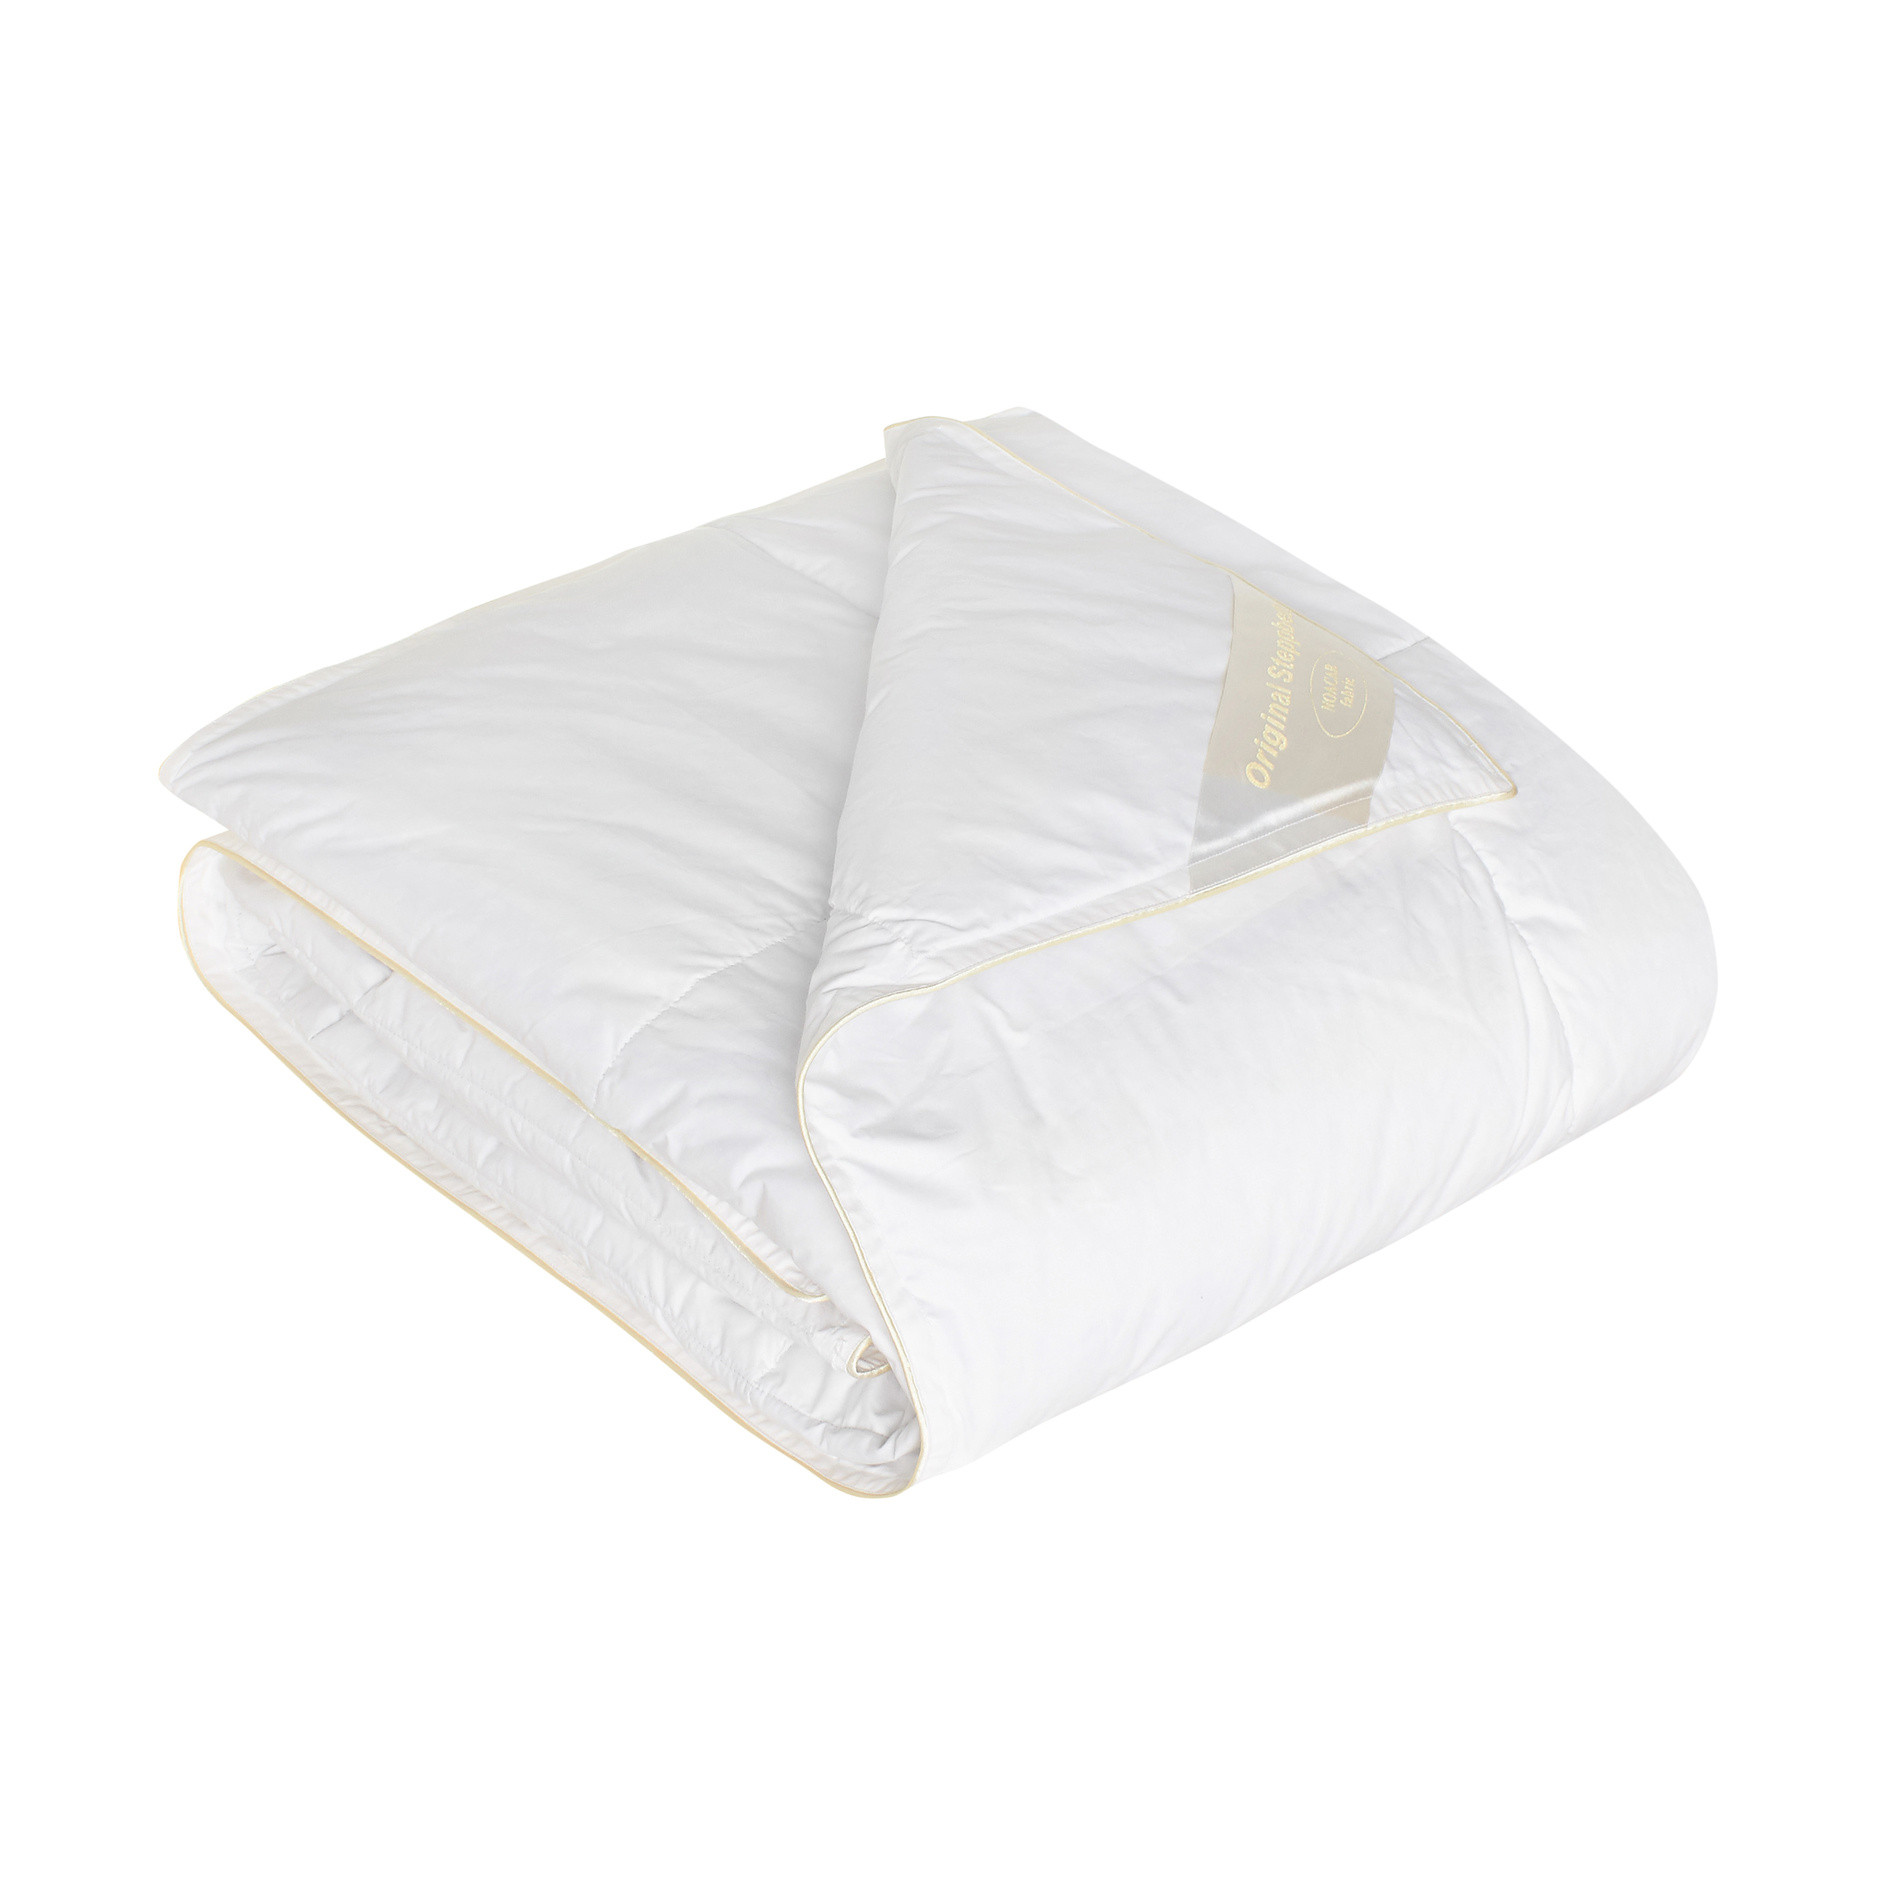 Duvet with feather padding, White, large image number 0